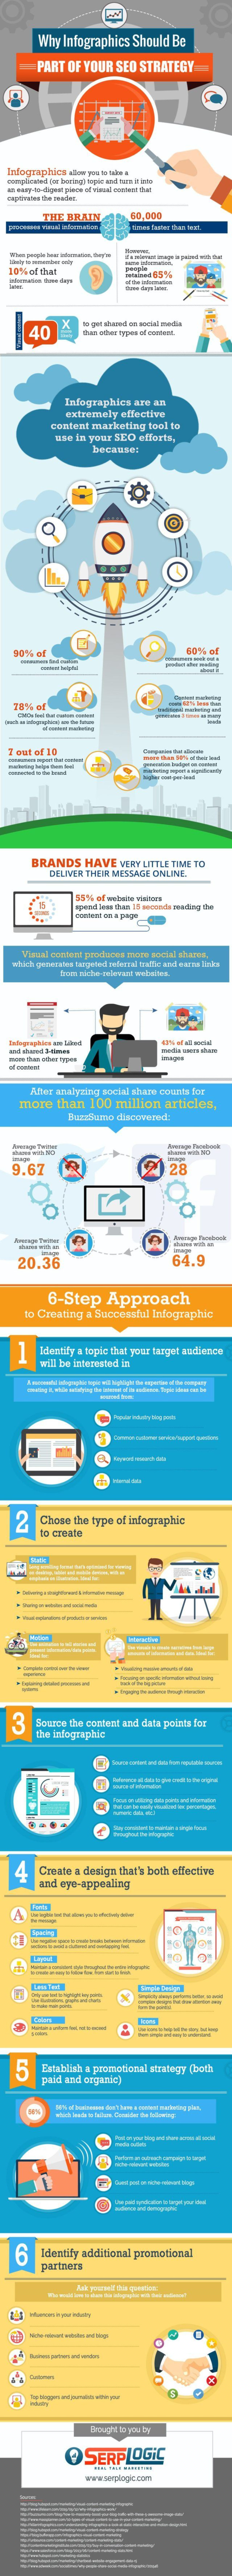 Why Infographics Are A Core of Any SEO Strategy | MarTech | The MarTech Digest | Scoop.it